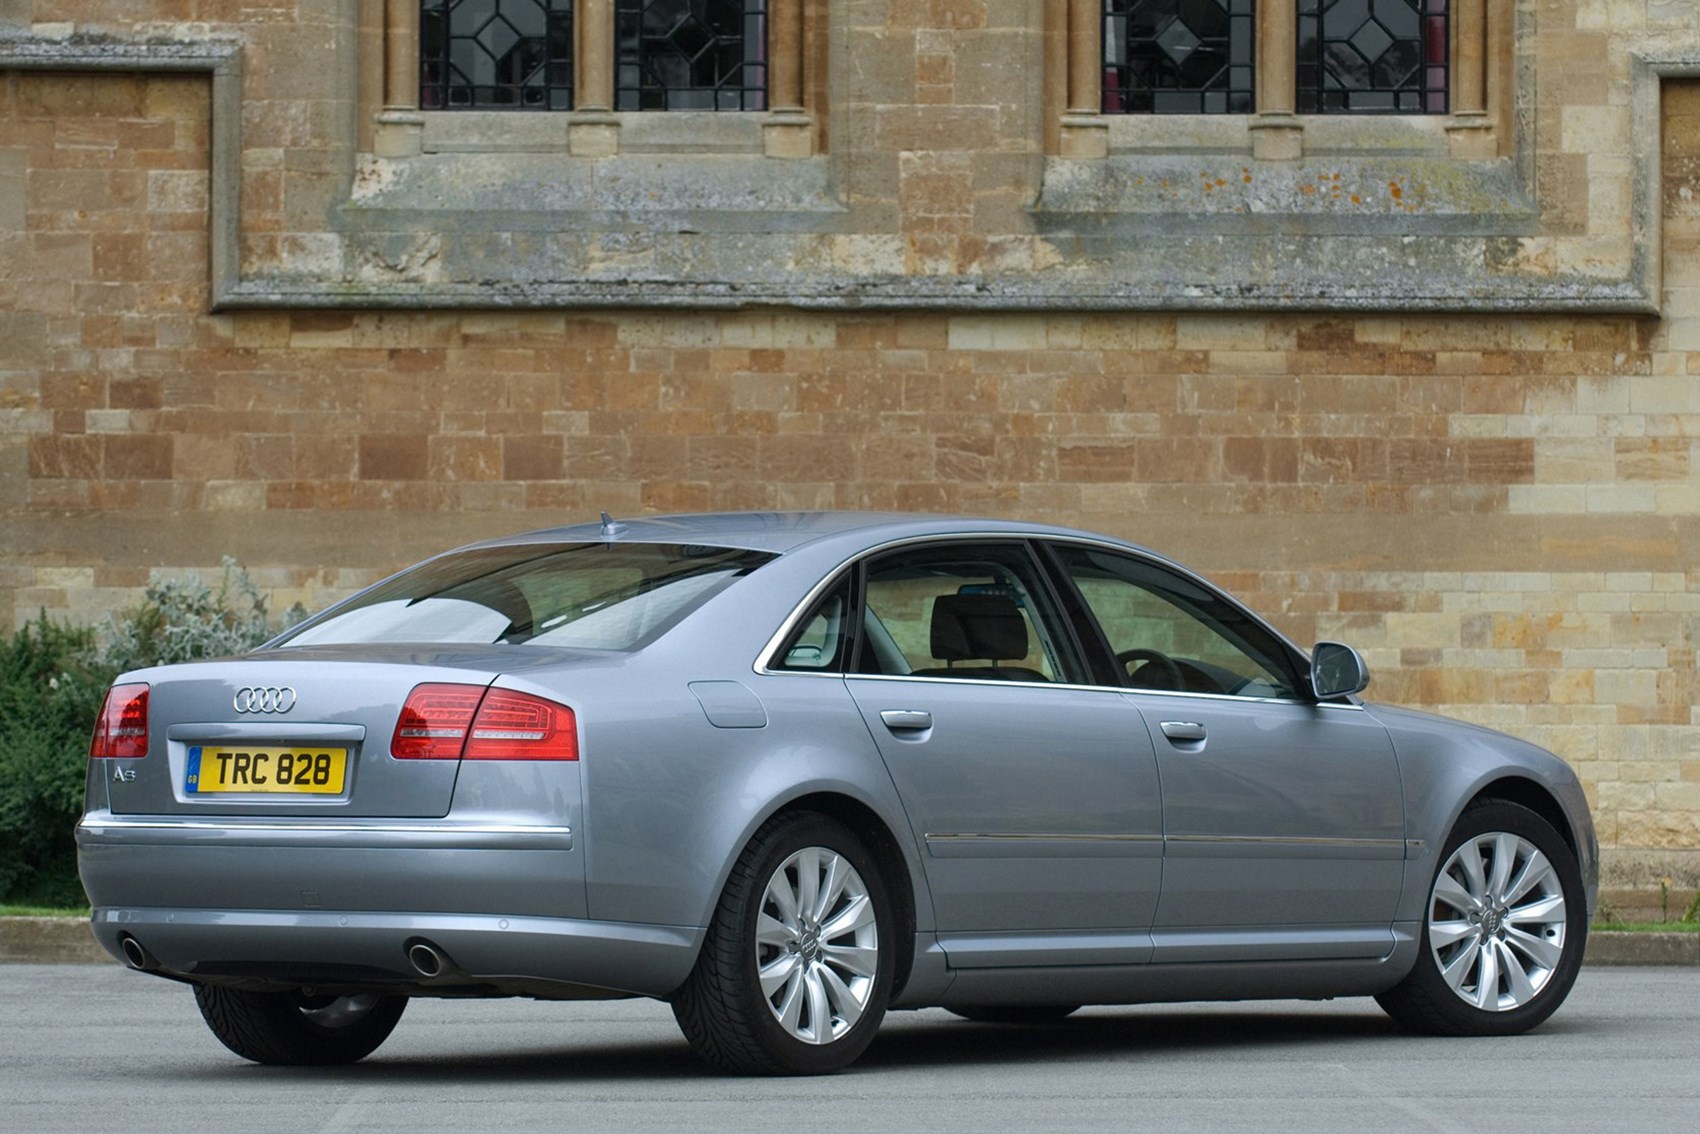 The best used luxury cars for less than £10k | Parkers